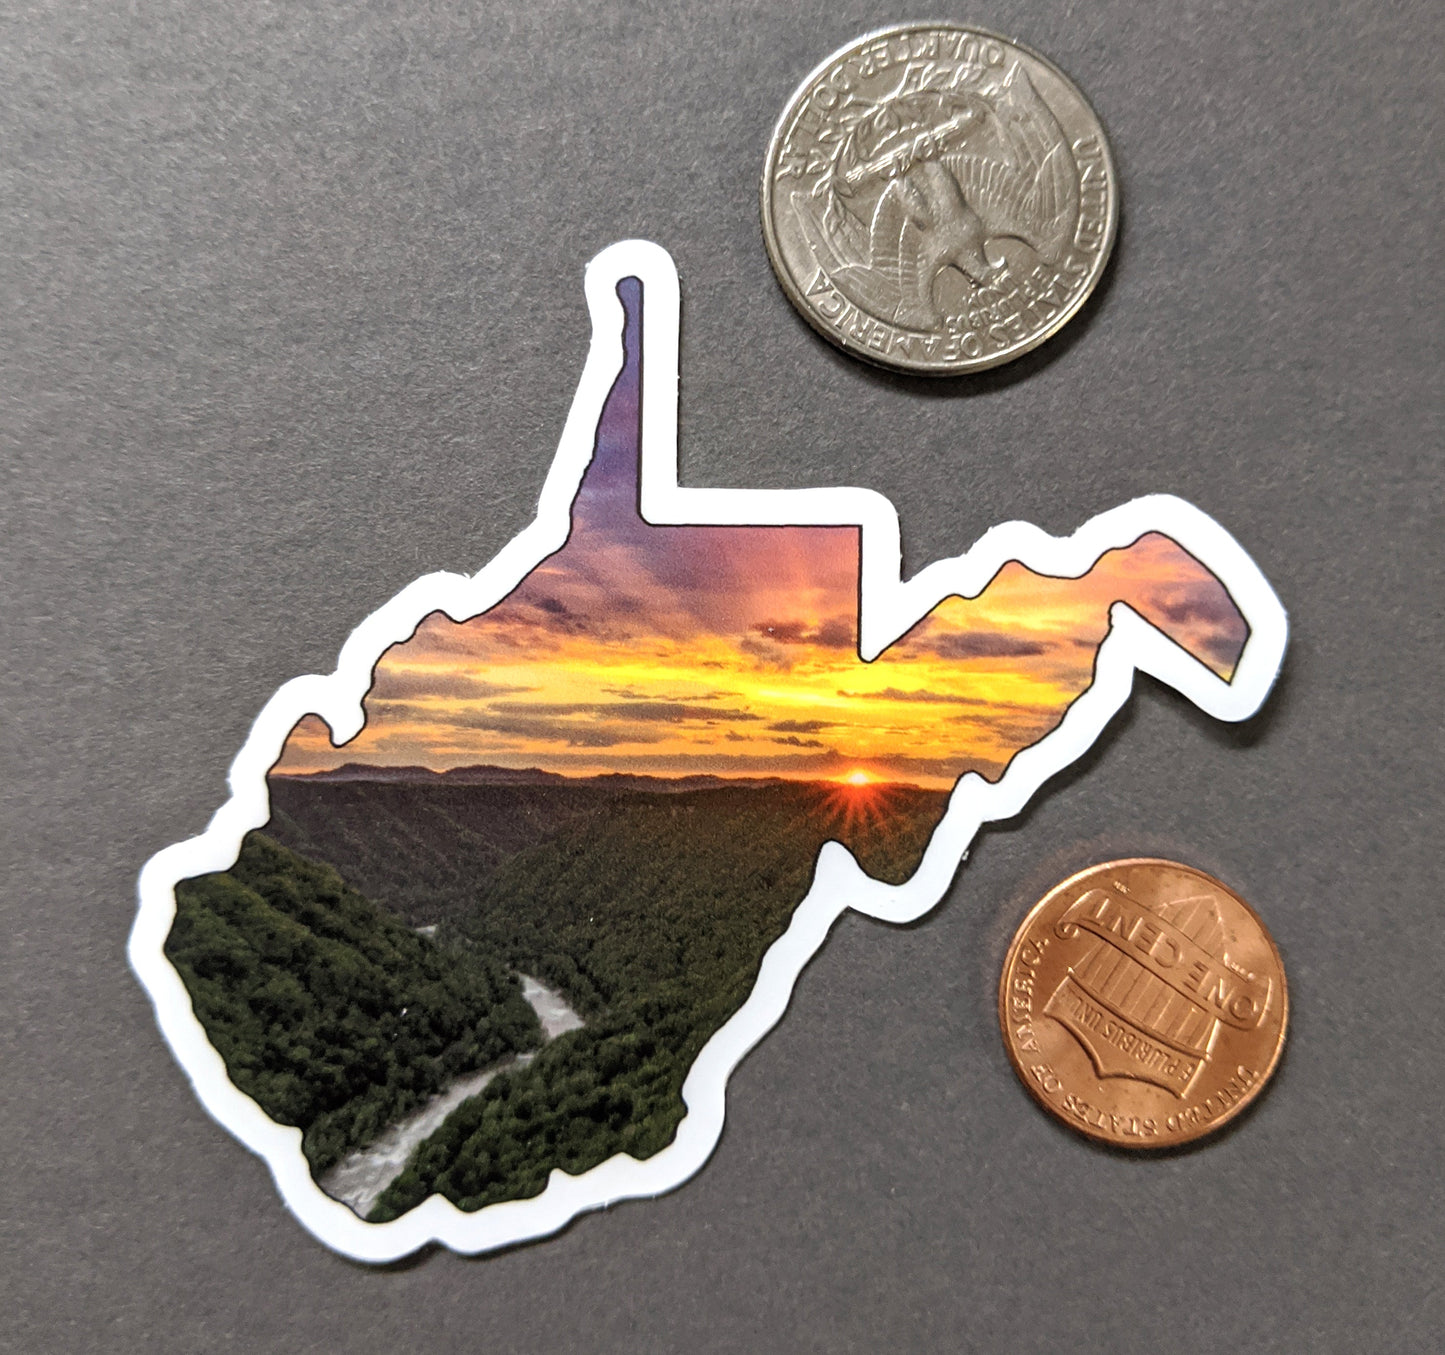 West Virginia New River Gorge Sticker - Vinyl Sticker - Sunset - Mountains - Reflection in a Pool